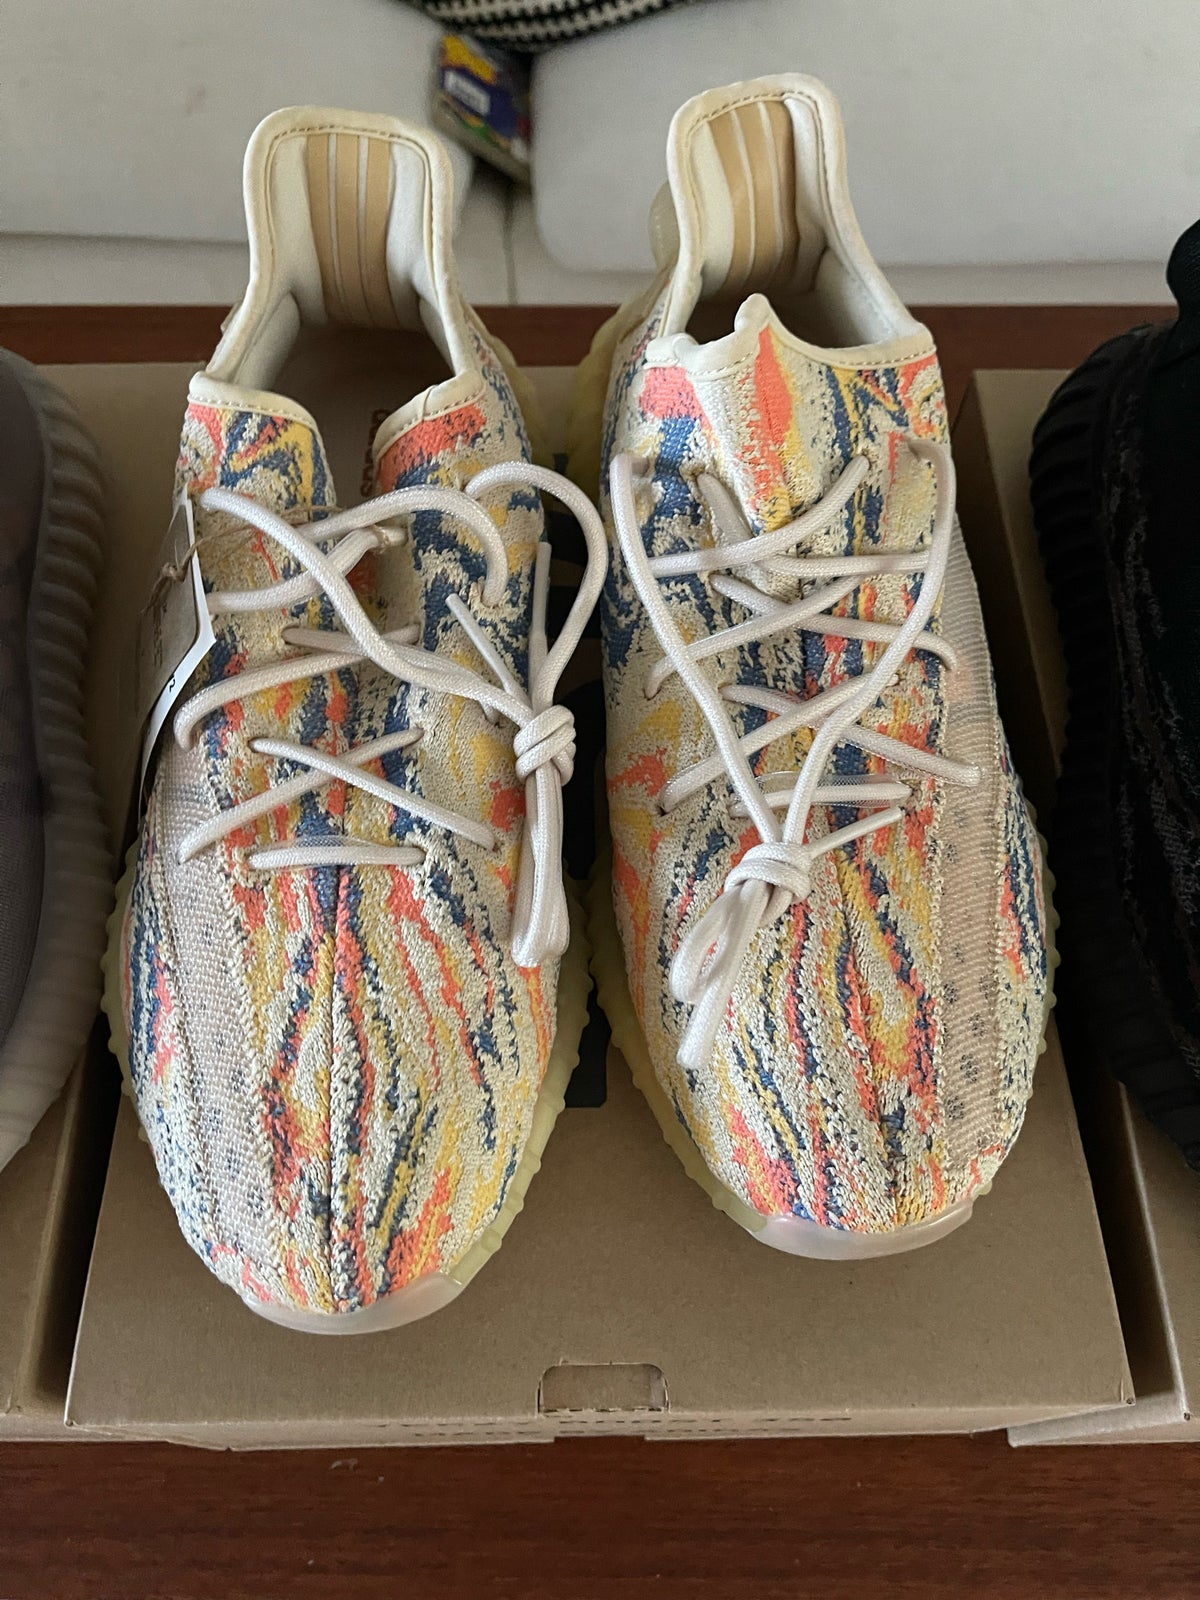 Sneakers, Adidas Yeezy Boost 350 v2, str. 43,5